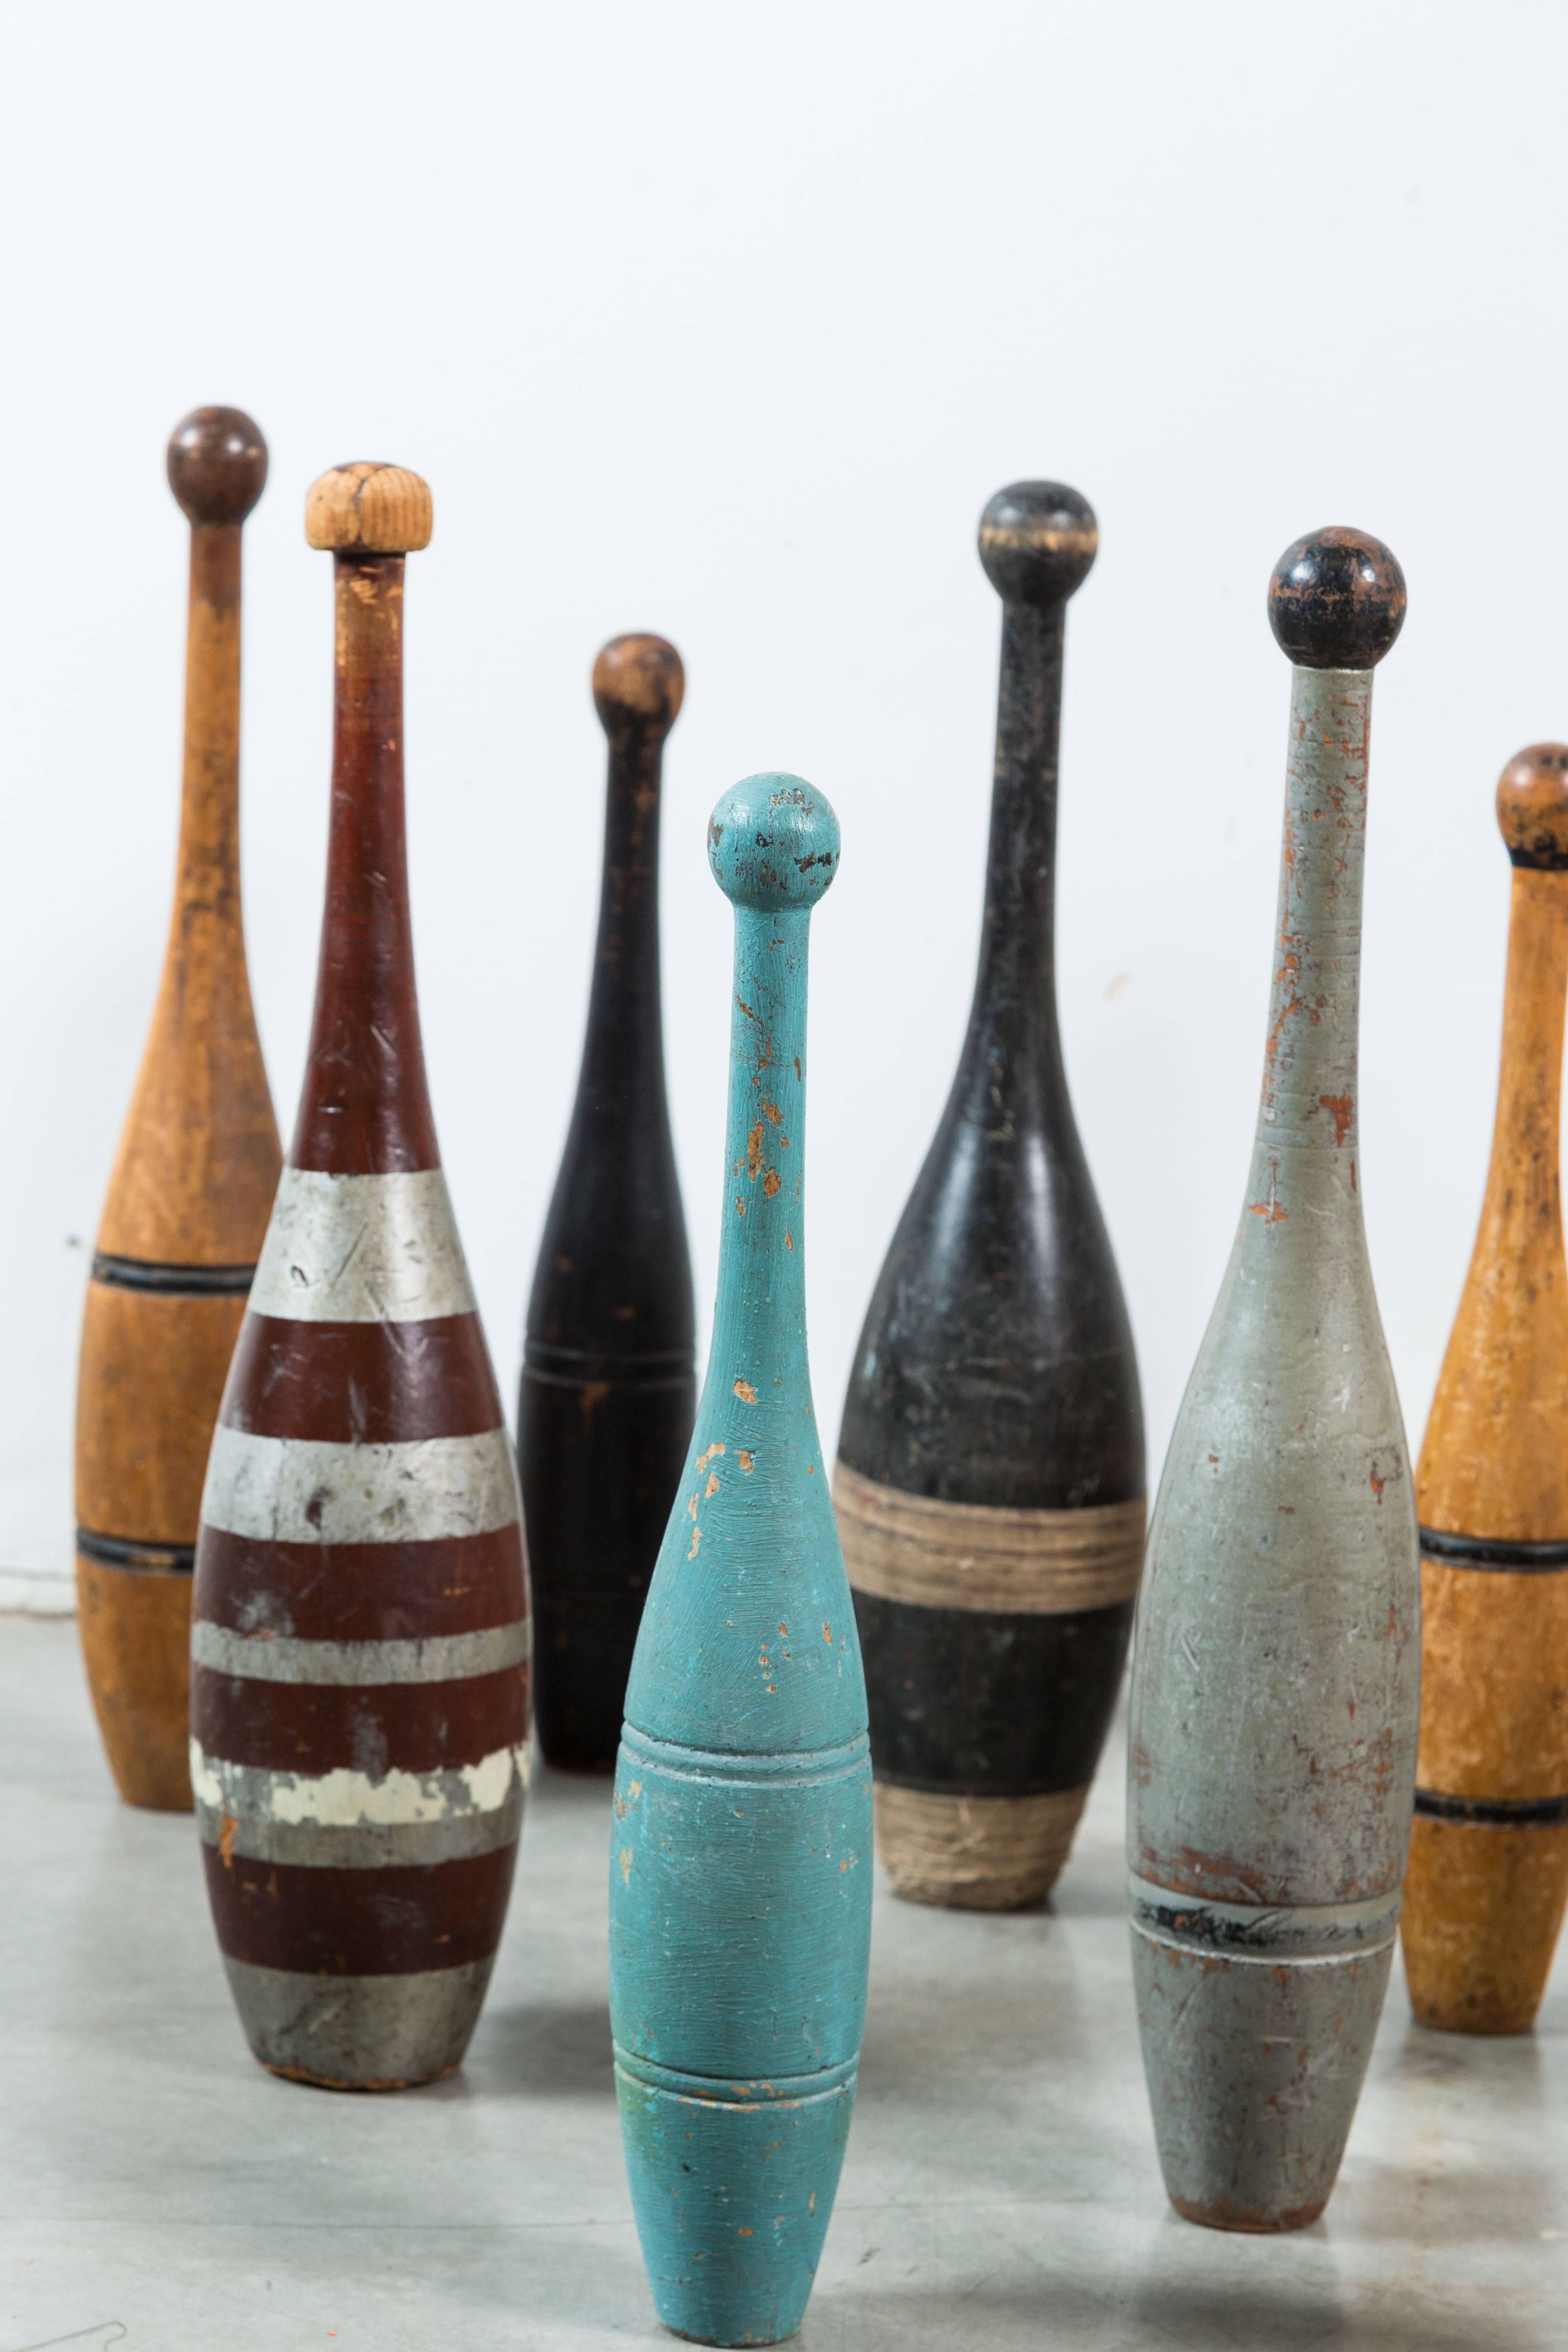 Large collection of 15 Indian clubs or juggling pins with original paint surface. Great alligatored patina on many. Late 19th and early 20th century clubs. Indian clubs rose to popularity in the US during the health craze of the late Victorian era.